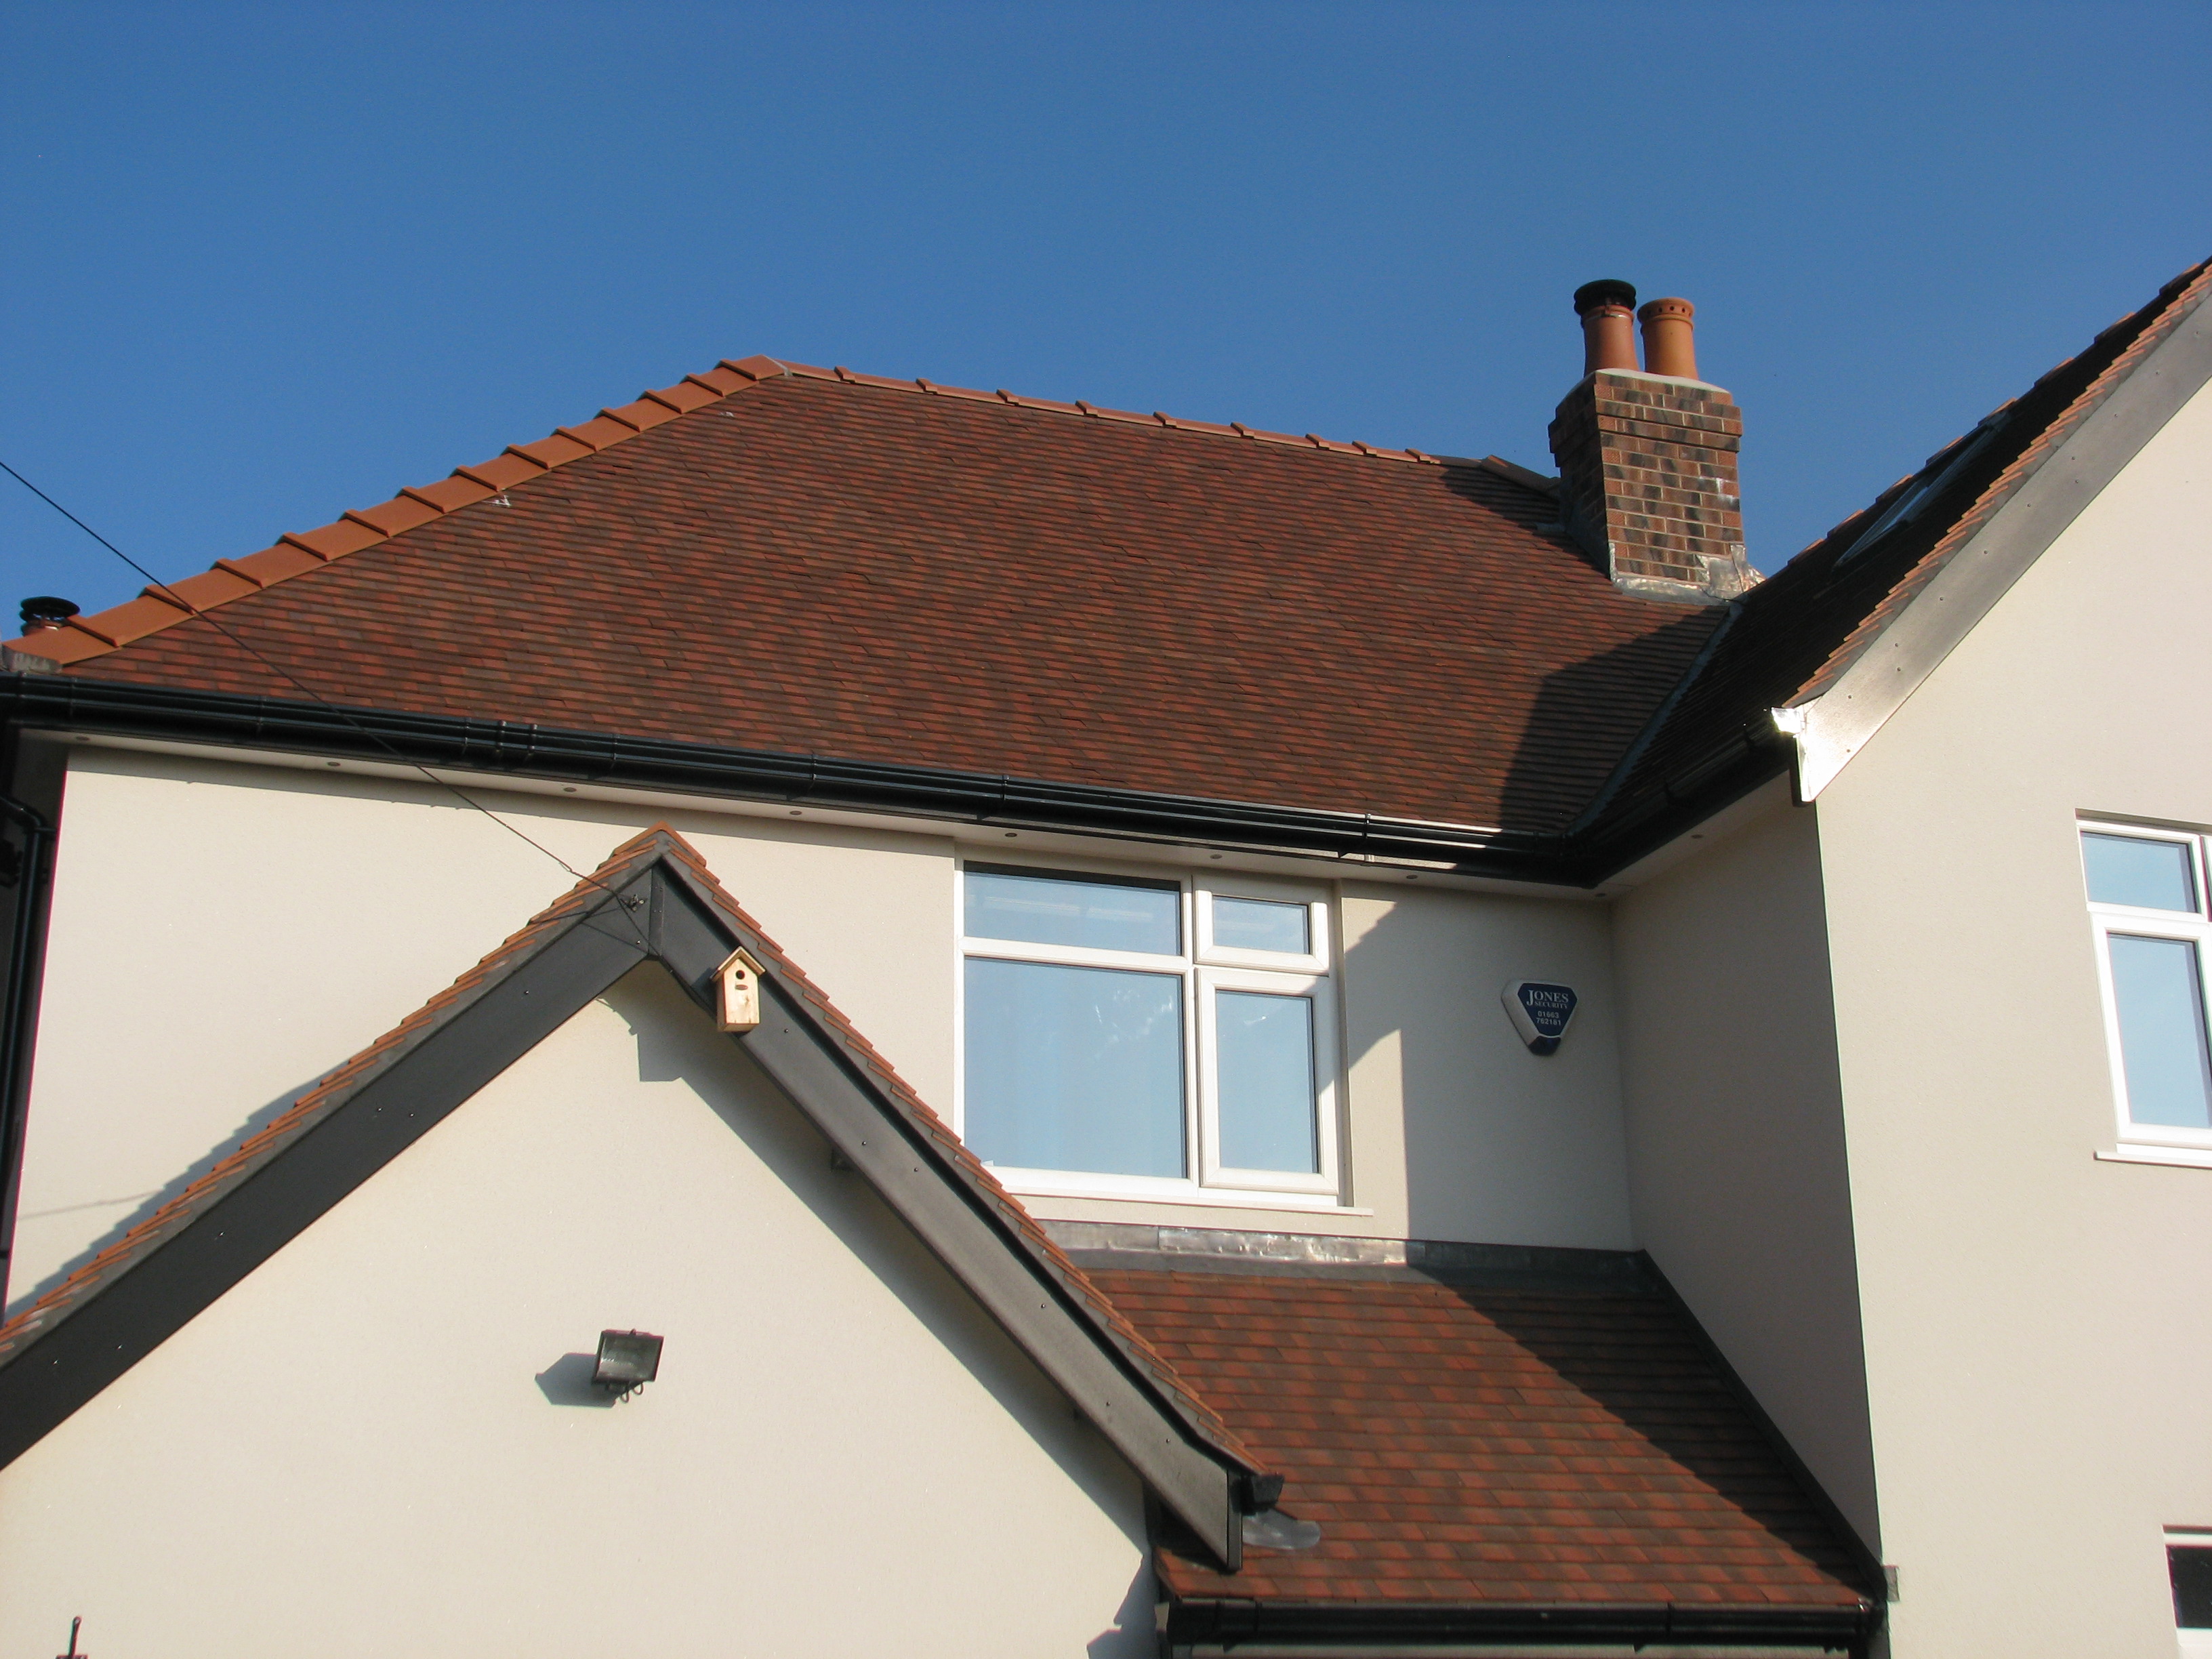 Re-roofing Stockport, Cheshire, High Peak. G Timlin Roofing Ltd